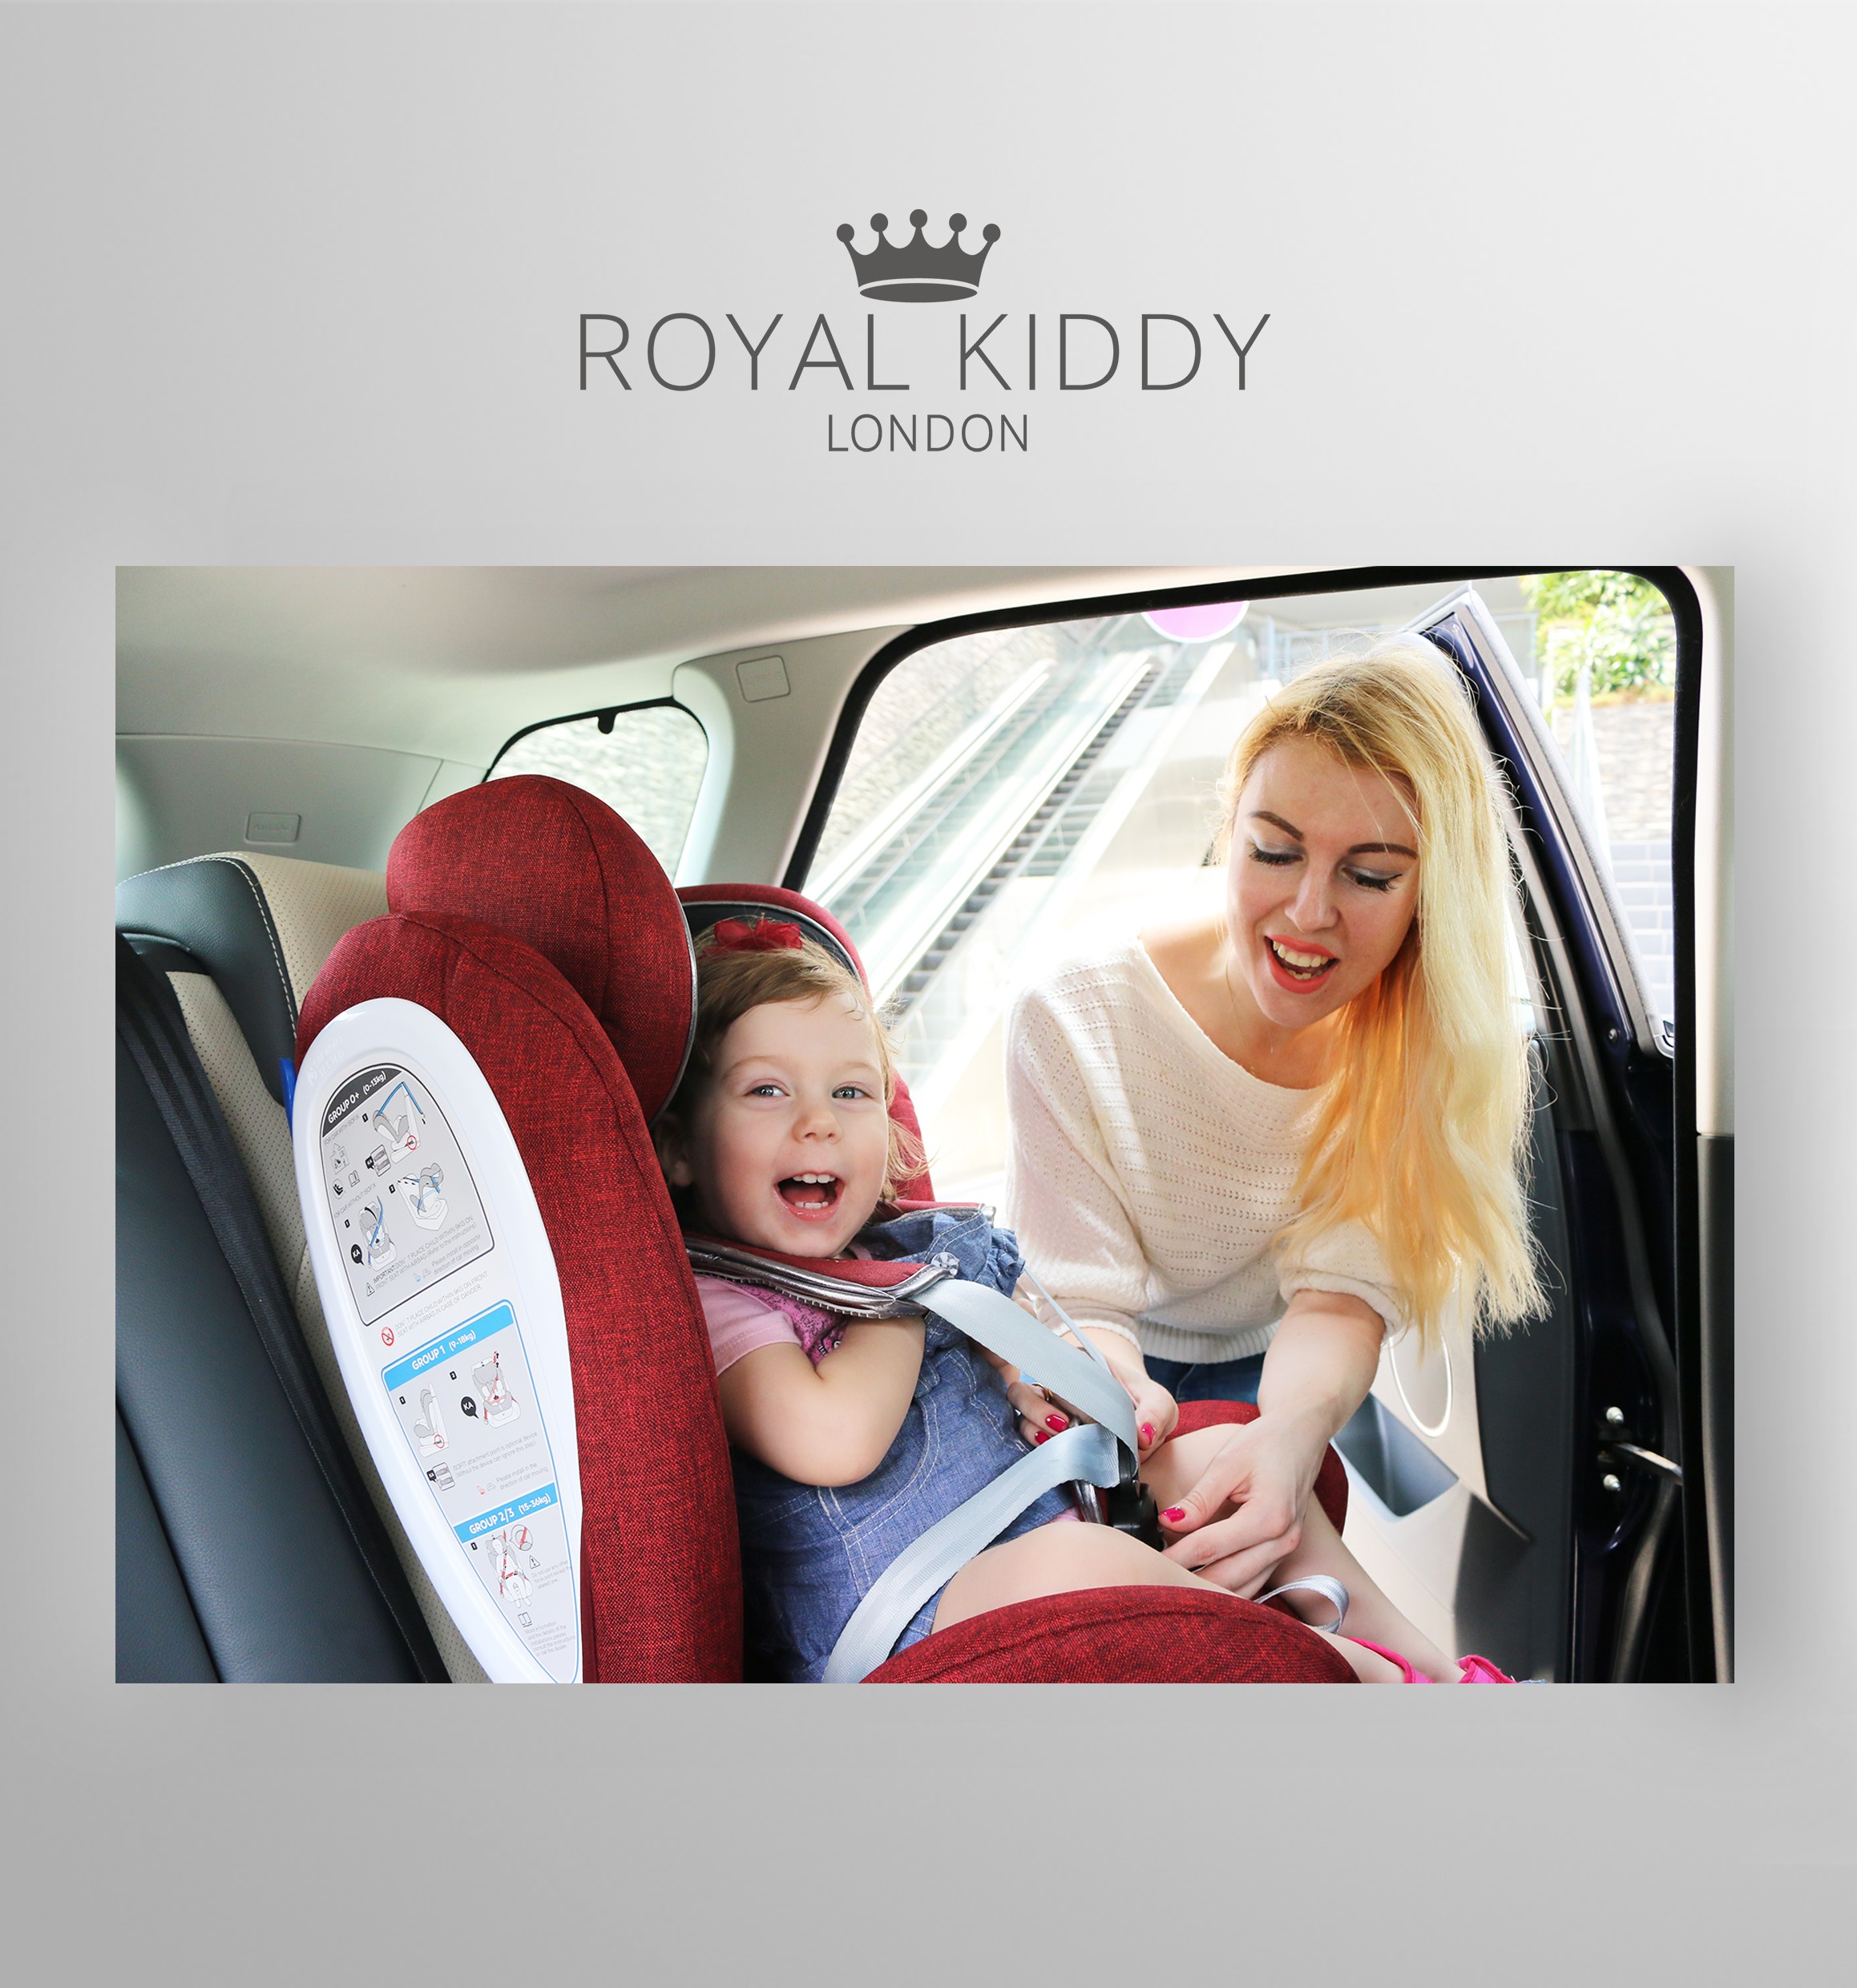 Royal Kiddy London Air Transporter Xtra Lightweight Compact Stroller + RK 360 Beyond Rotating ISOFIX CarSeat + RK n 3 in 1 Night Angel Swinging Bedside Cot + FREE Gifts!!